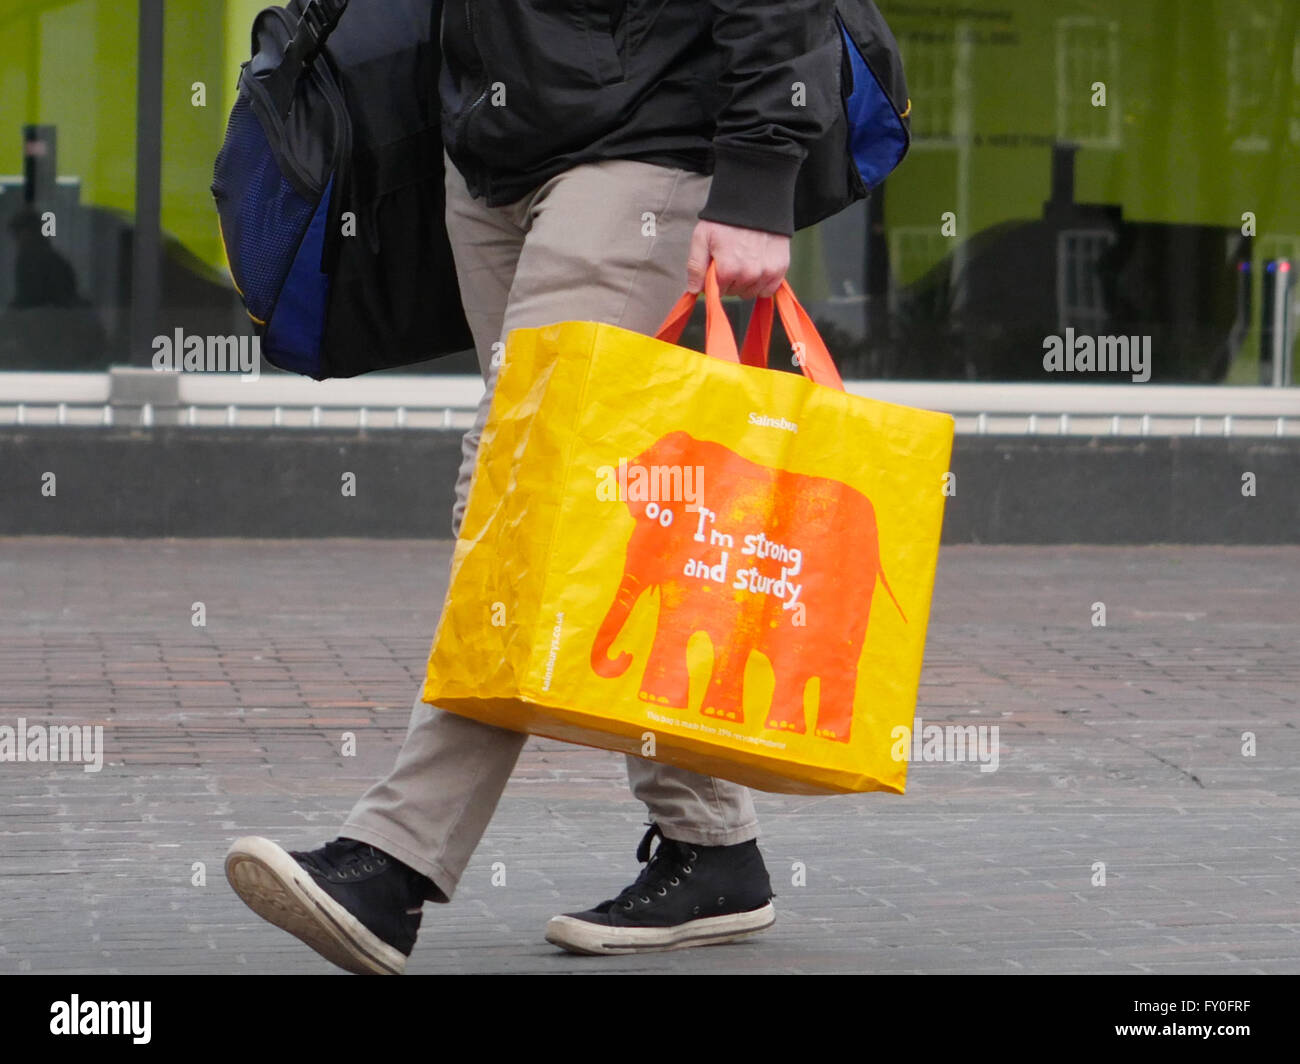 Man holding shopping bags in the street, close-up of legs Stock Photo